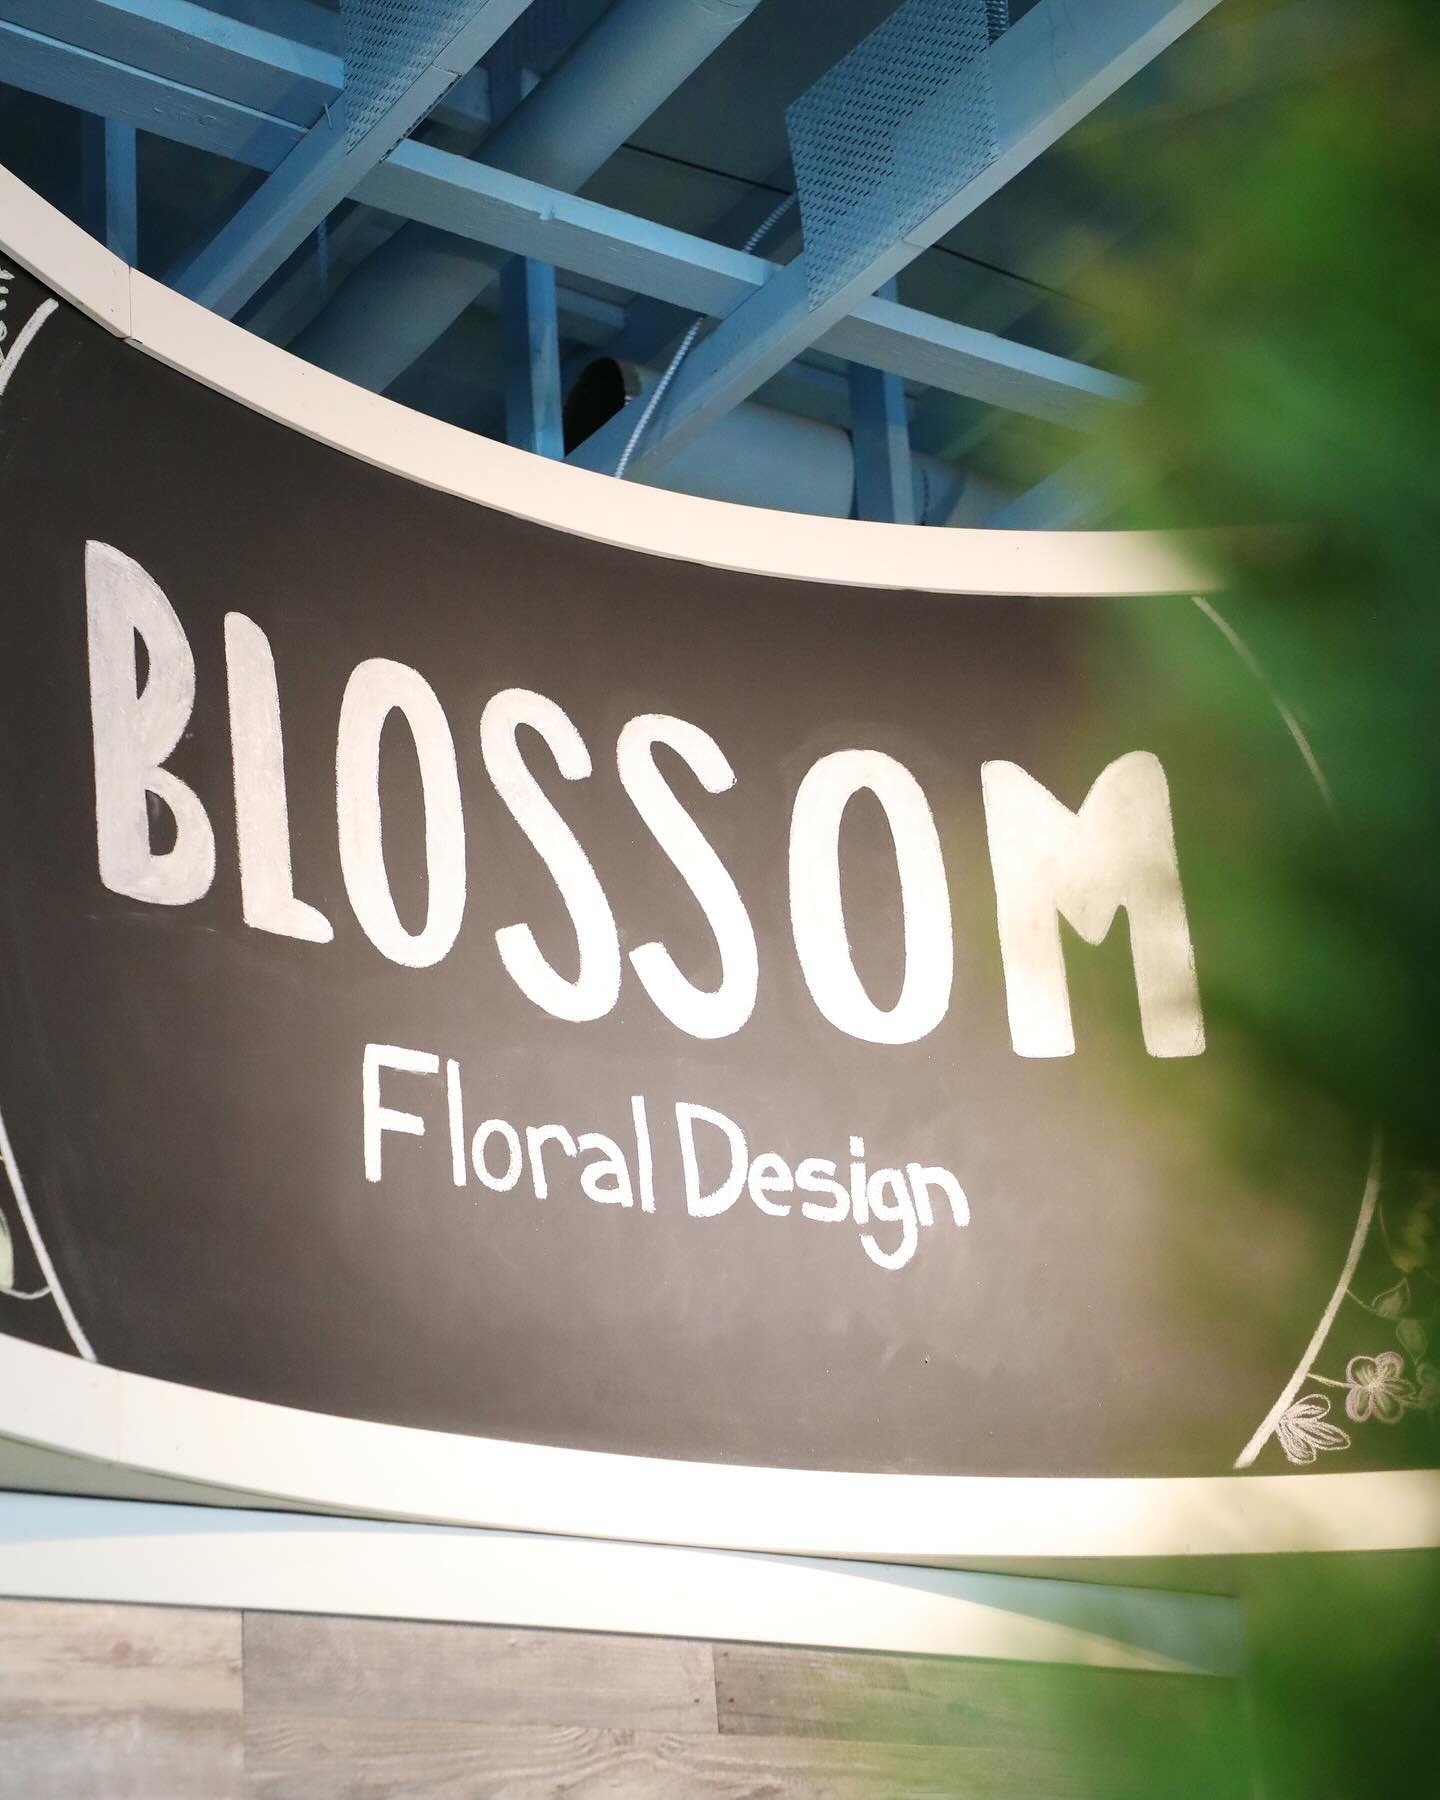 This week you could probably use some fresh new plants or blooms in your life! 
Be sure to visit @blossomfloraldesignchilliwack (7425 Vedder Road) and pick up a premade bouquet or call ahead and order something specific!!!
#aroundchilliwack